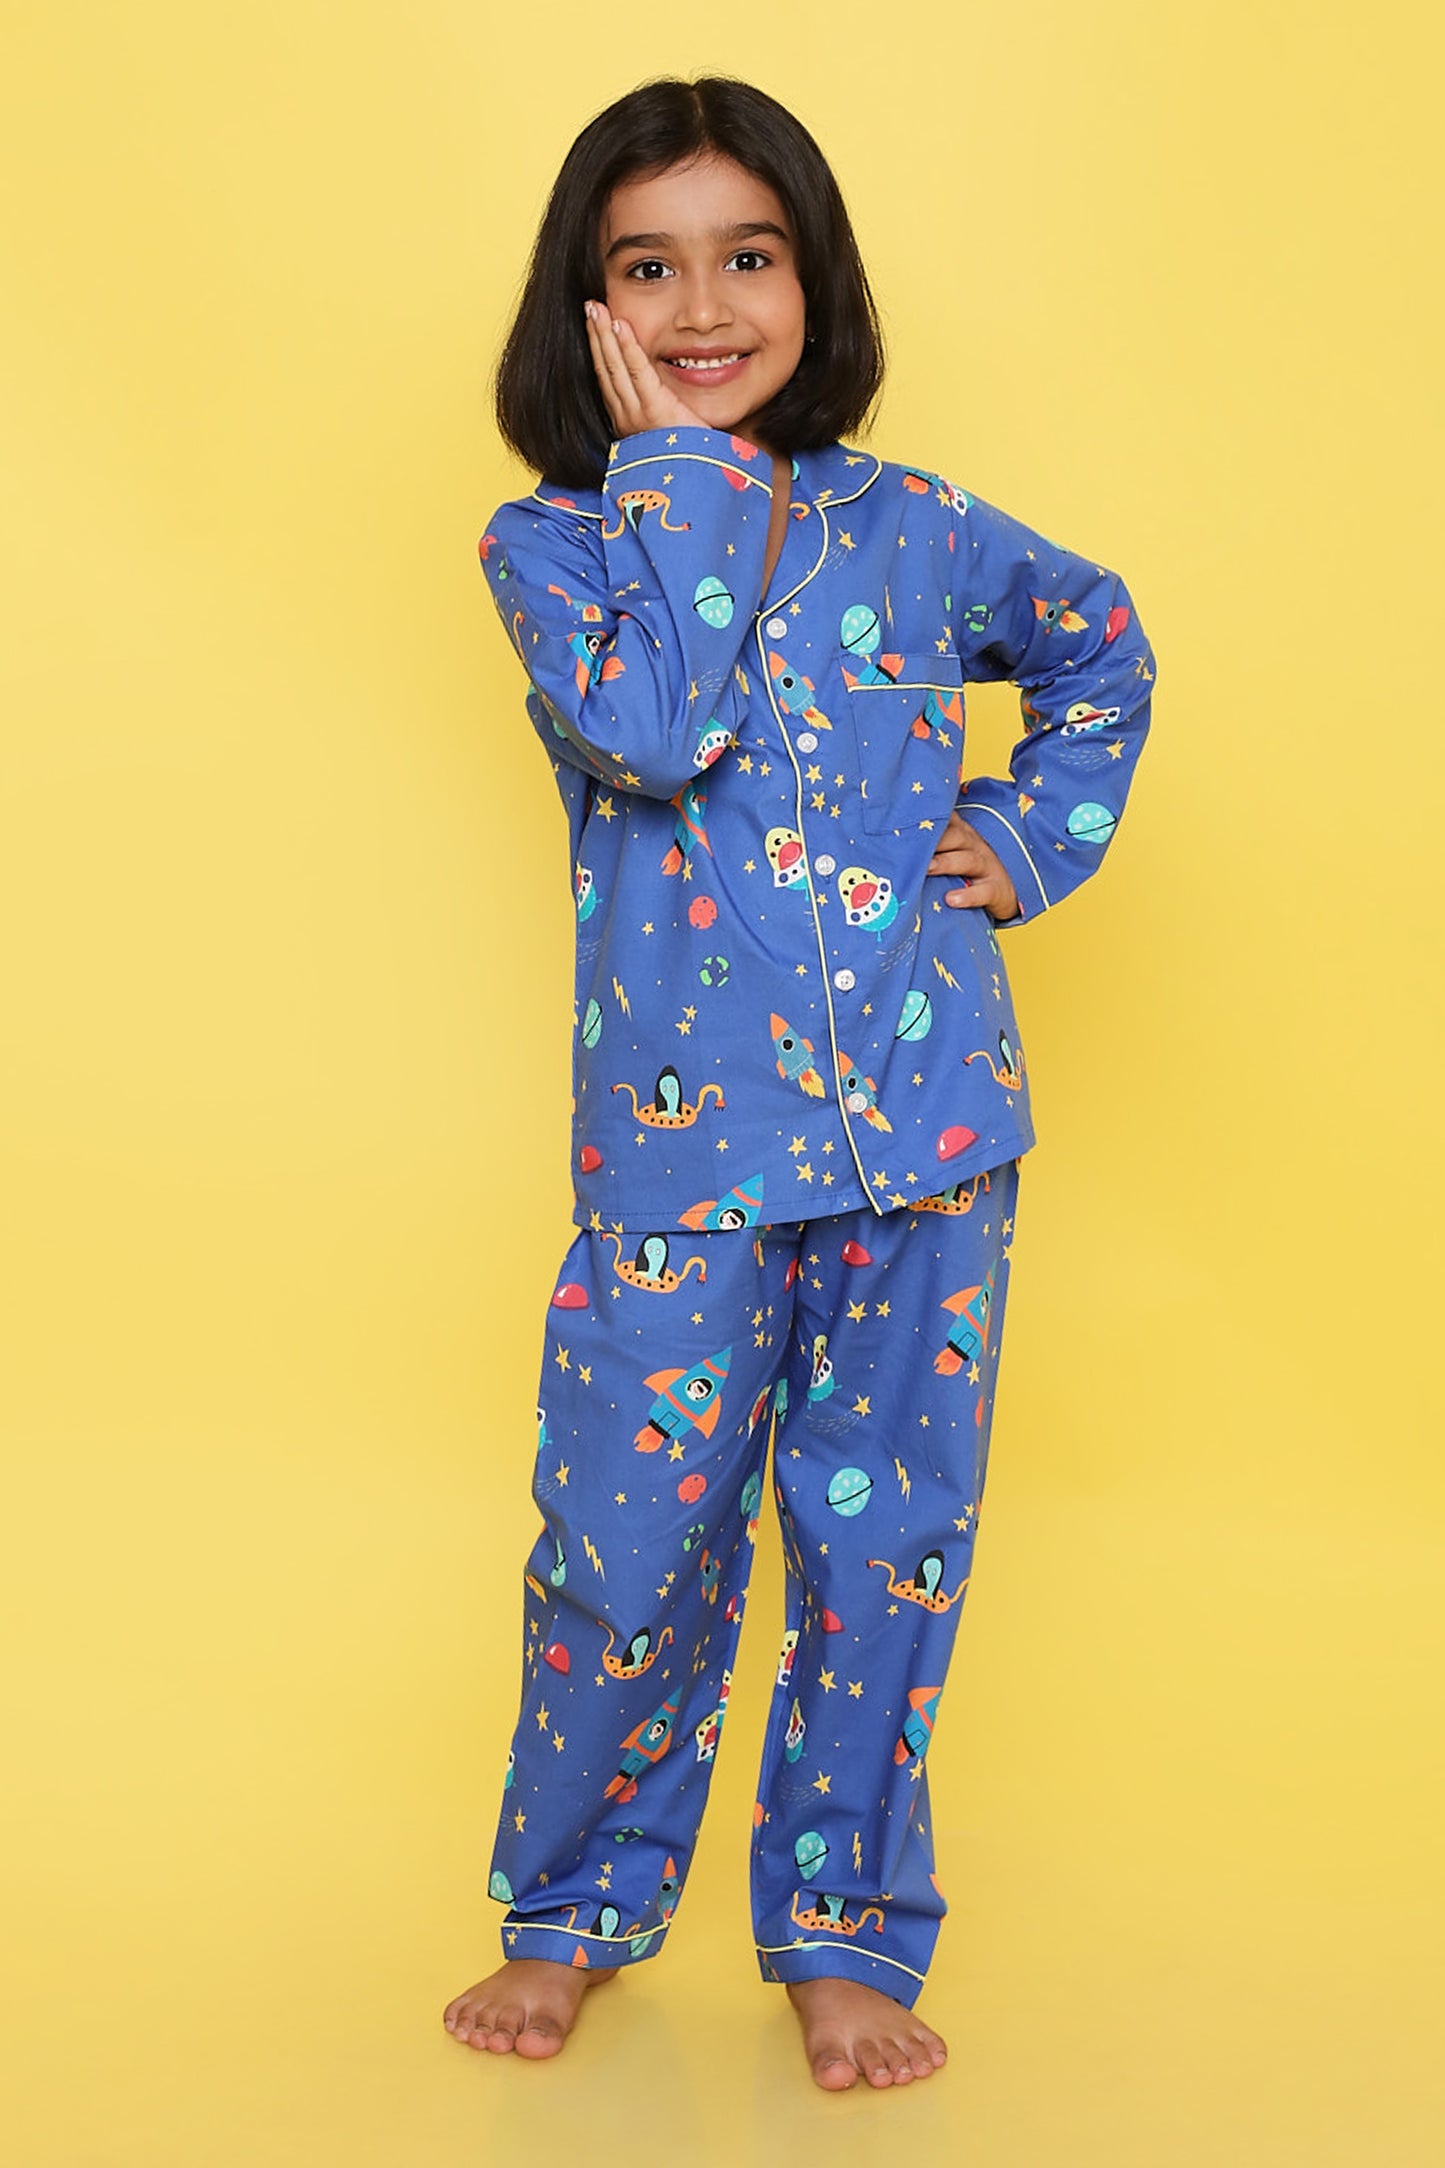 Knitting Doodles Premium cotton Kids' Notched Collar Night suit in interactive space Print- Blue